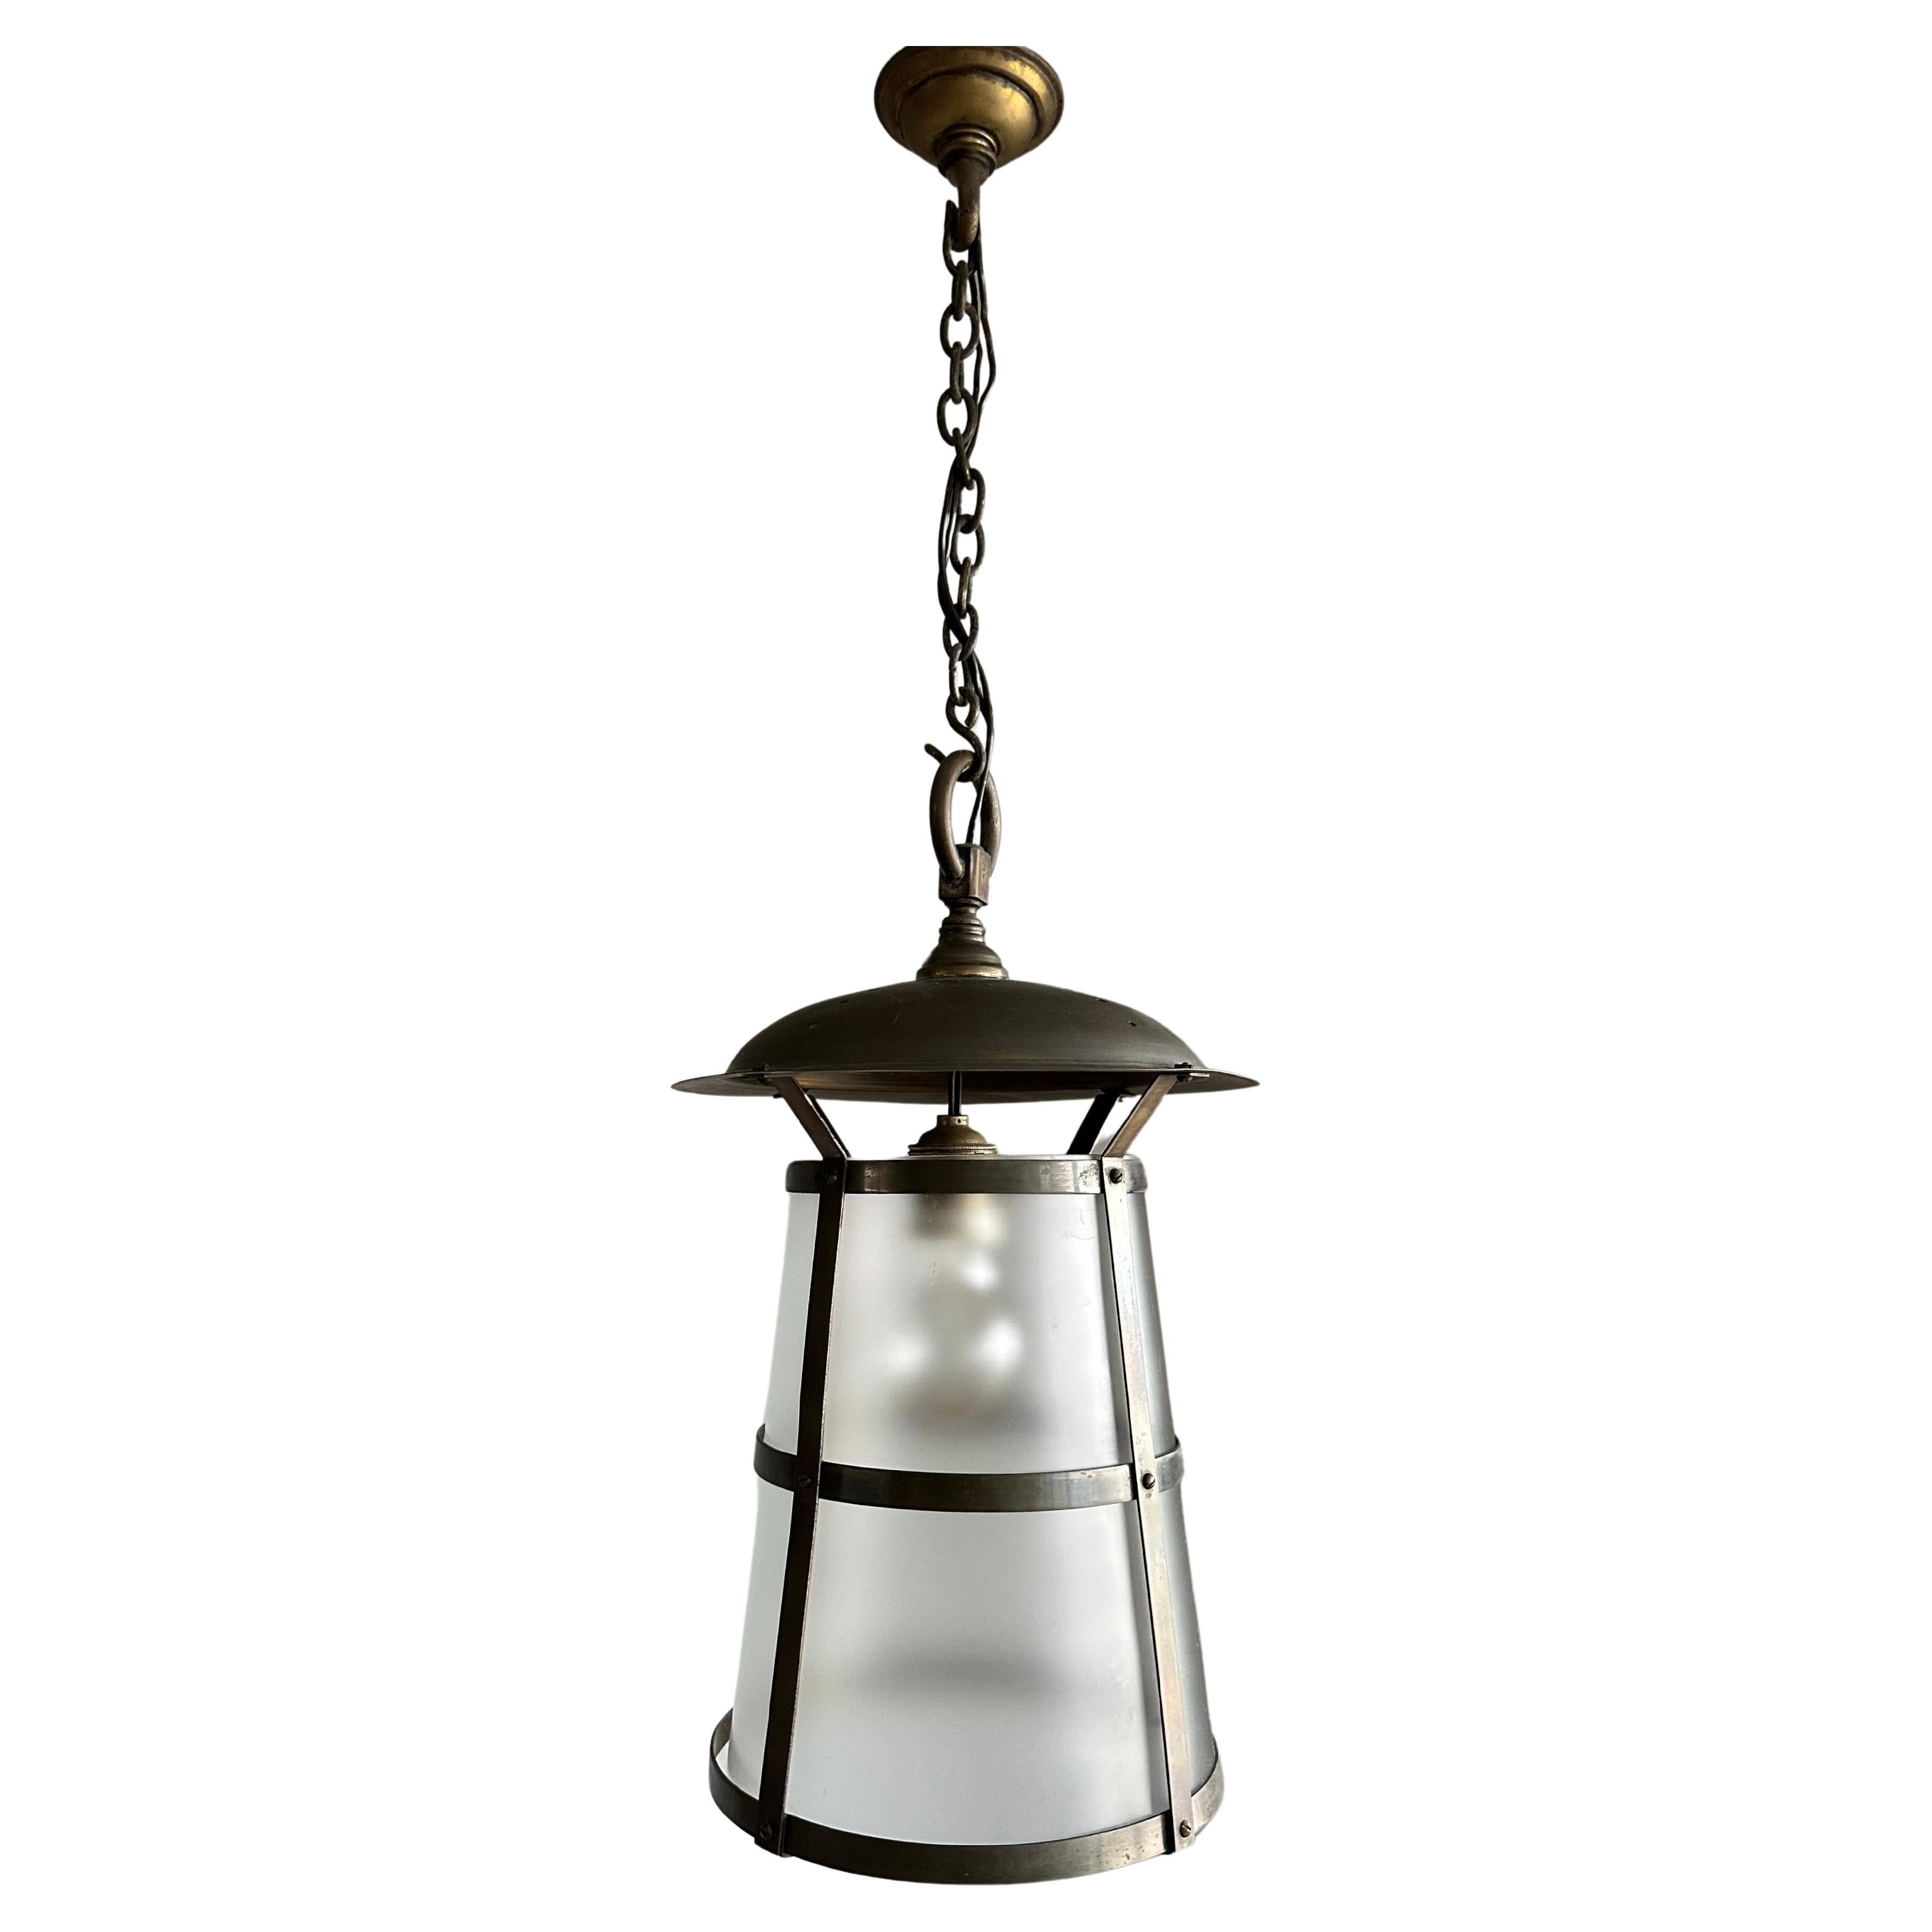 Highly Stylish Brass and Glass Arts & Crafts Pendant Light, 1910 Berlage Style For Sale